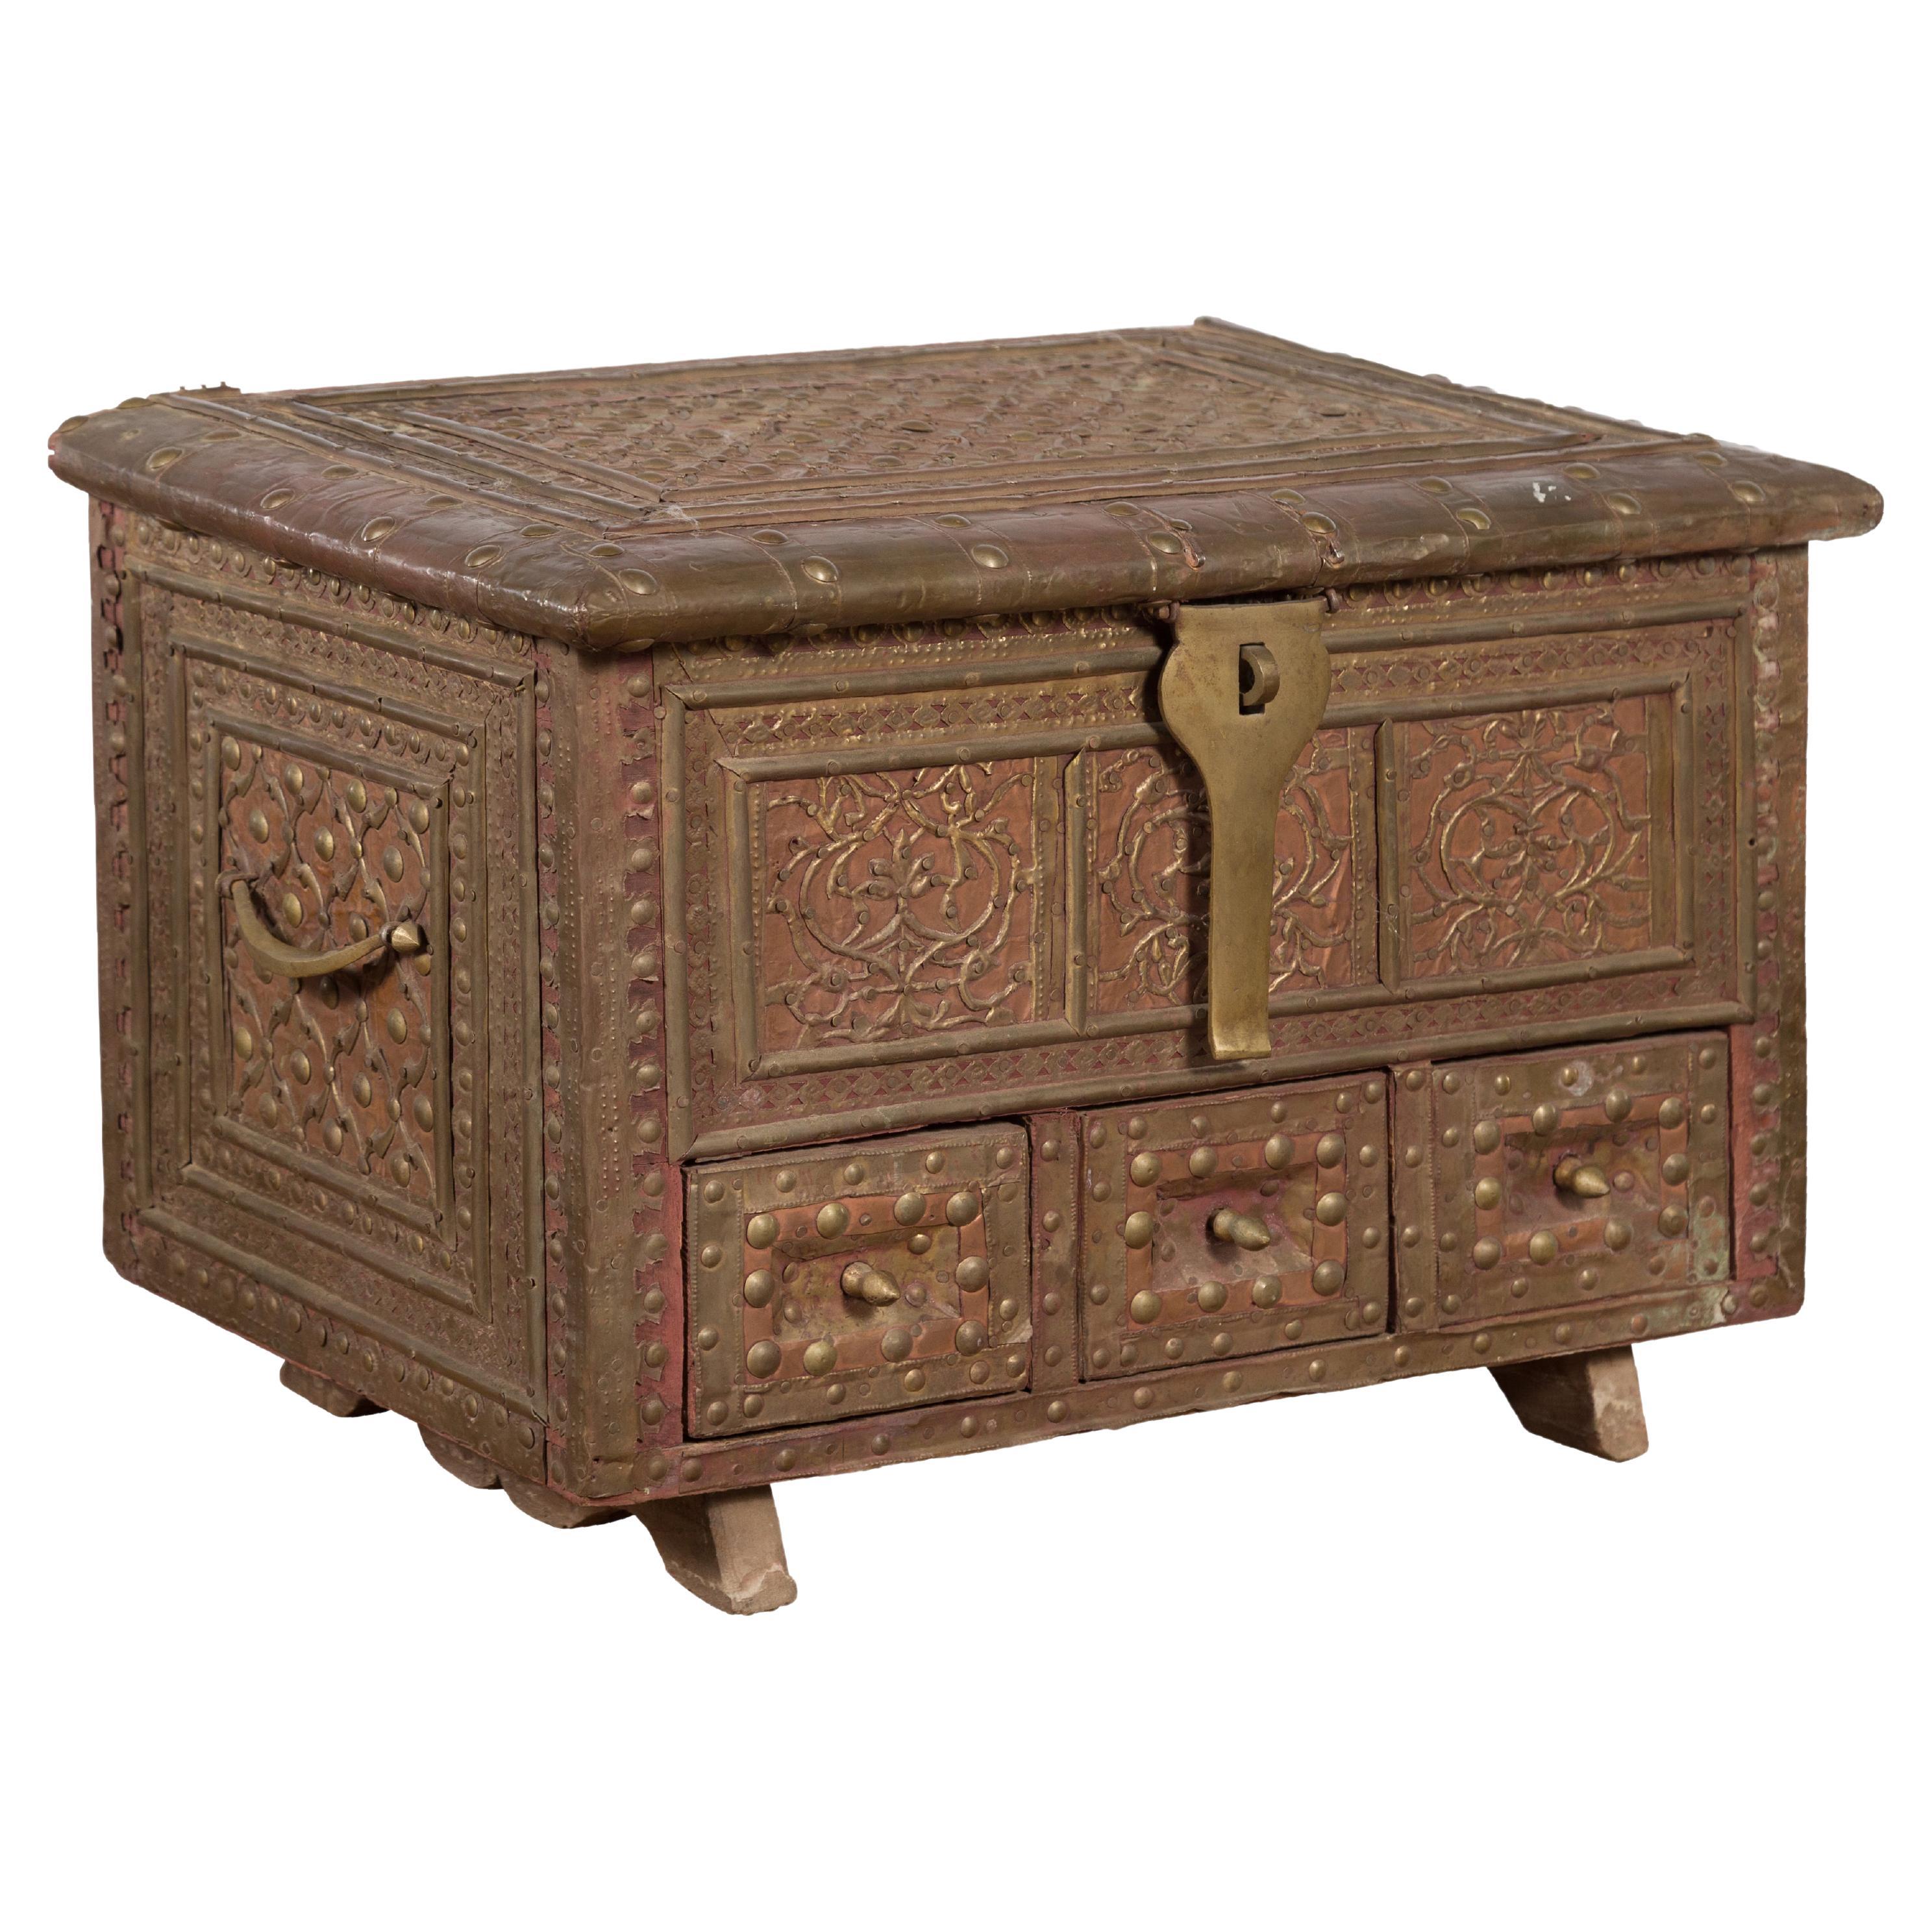 19th Century Indian Brass over Wood Bridal Chest with Hand-Tooled Décor For Sale